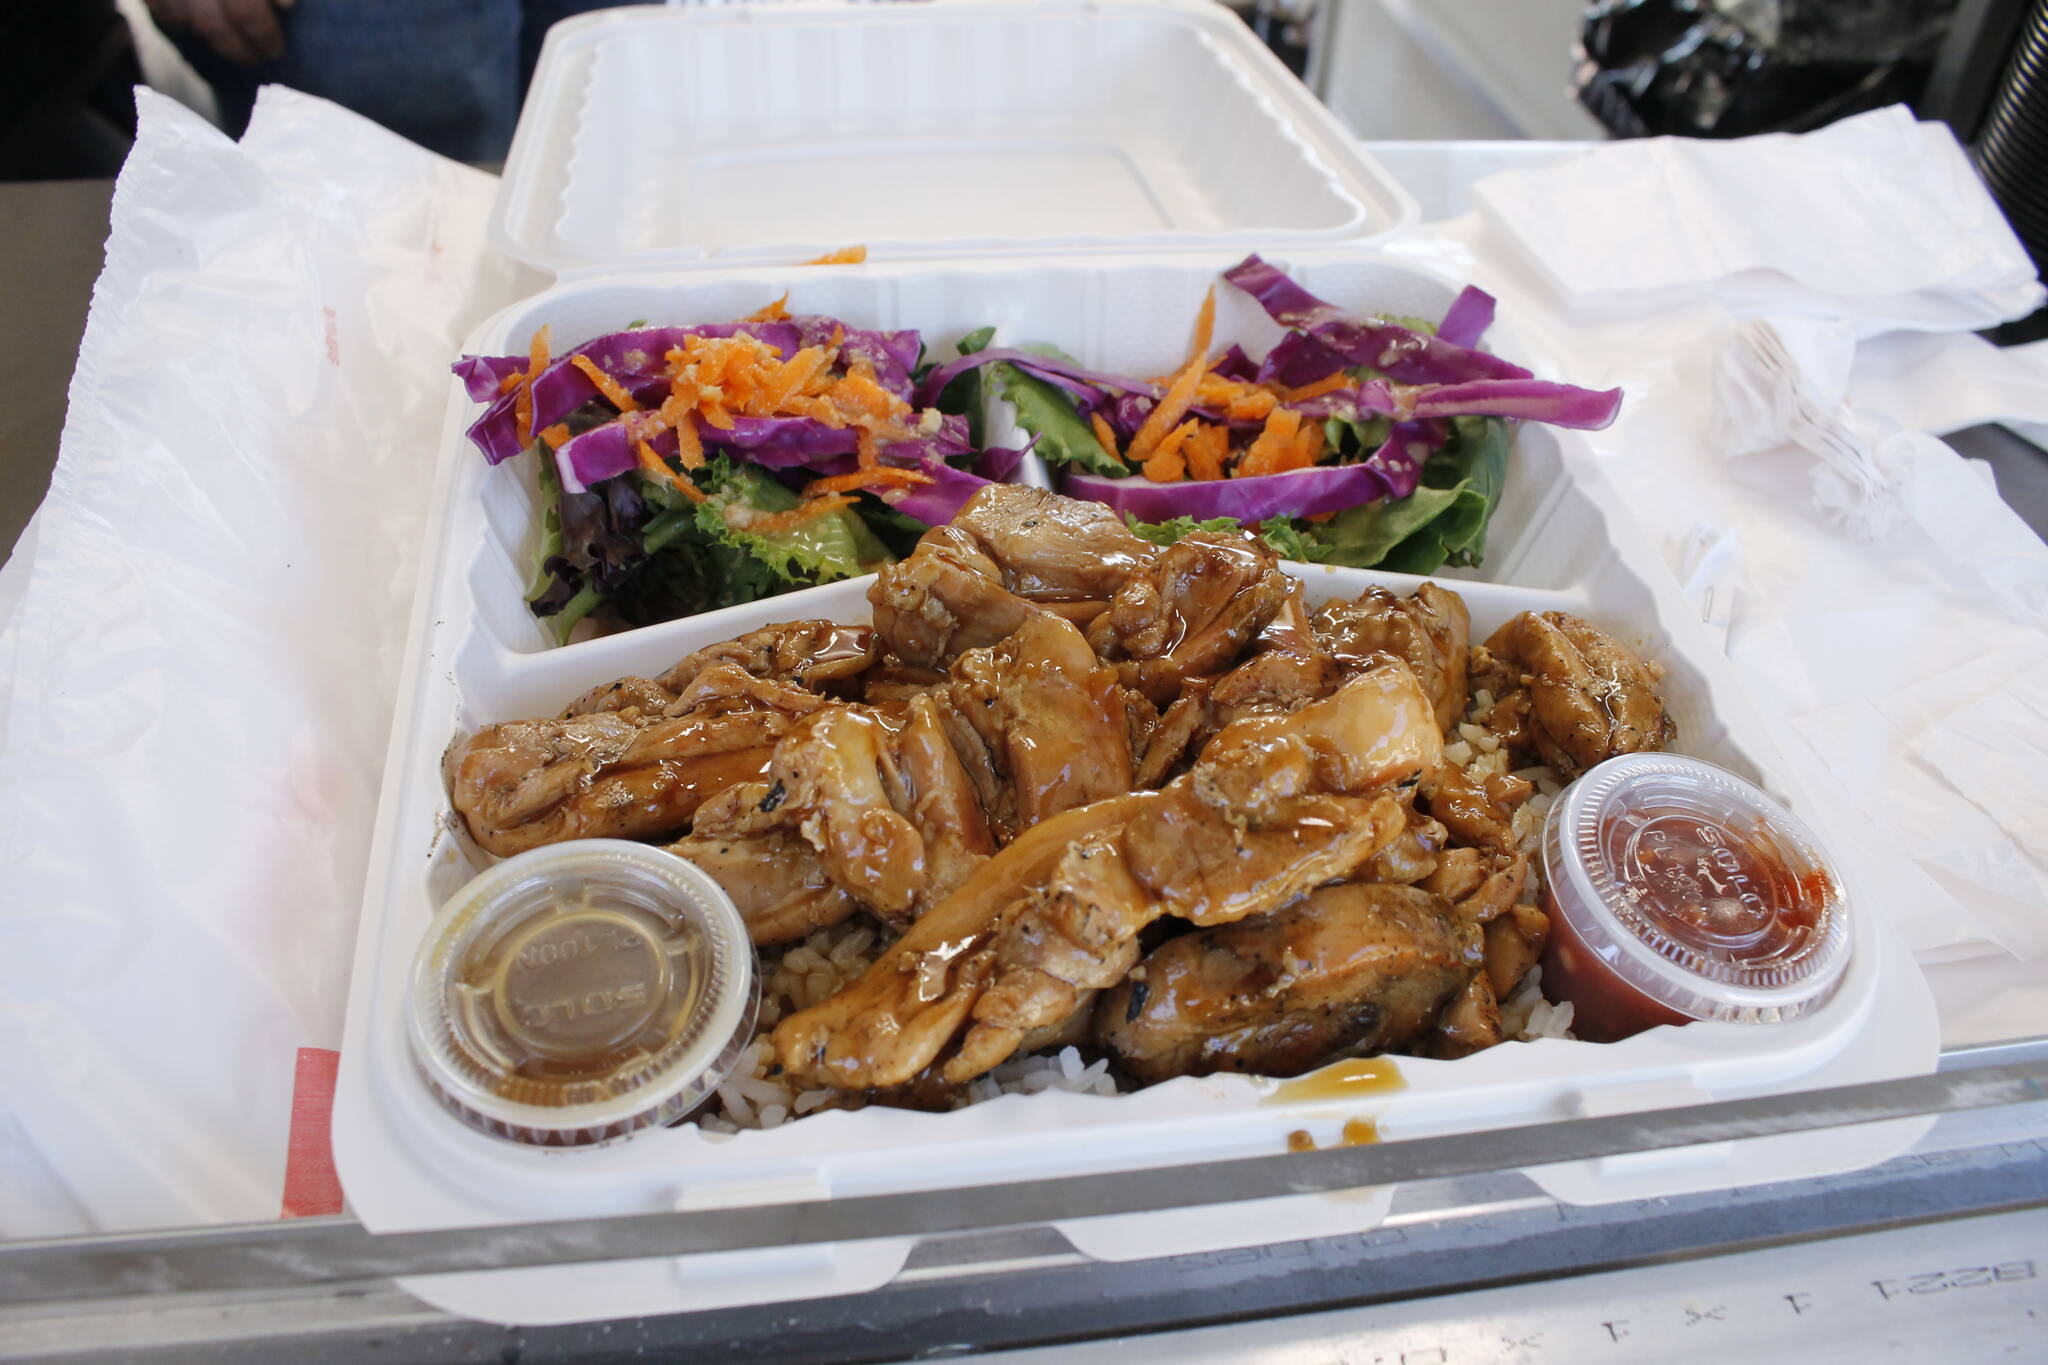 A serving of chicken teriyaki from IC Teriyaki. (Photo by Kira Erickson/South Whidbey Record)